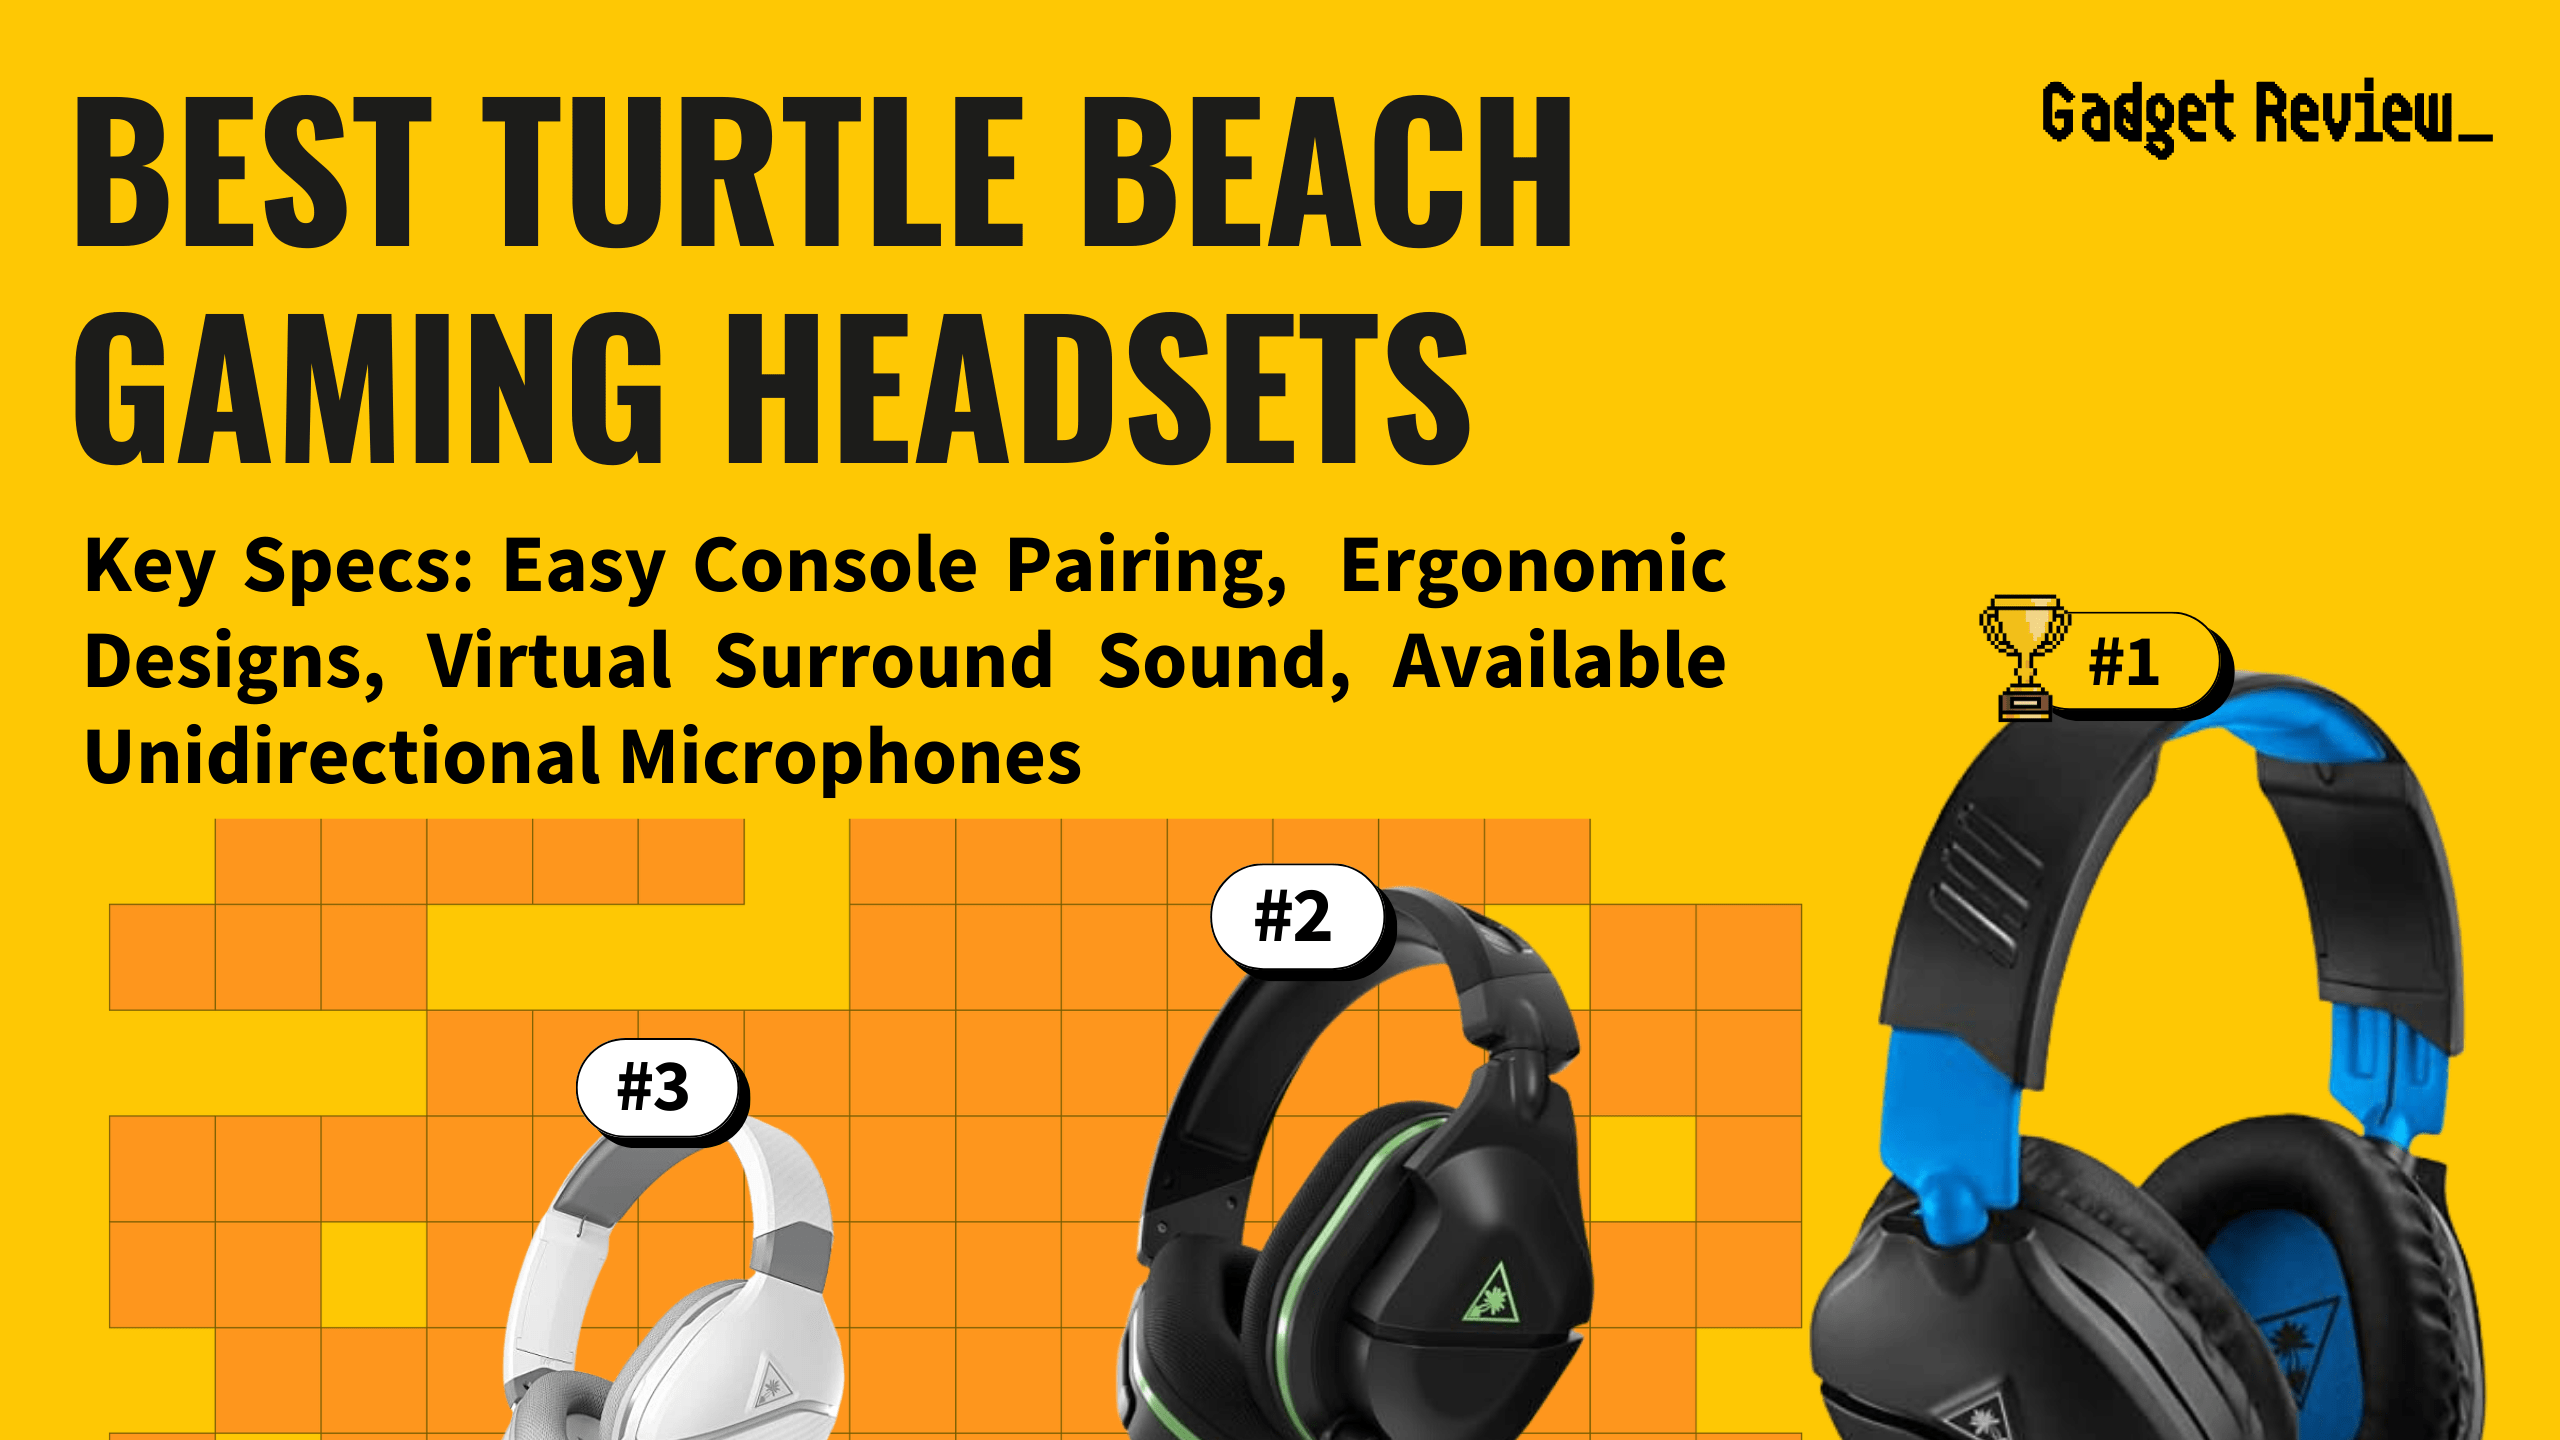 Best Turtle Beach Gaming Headsets